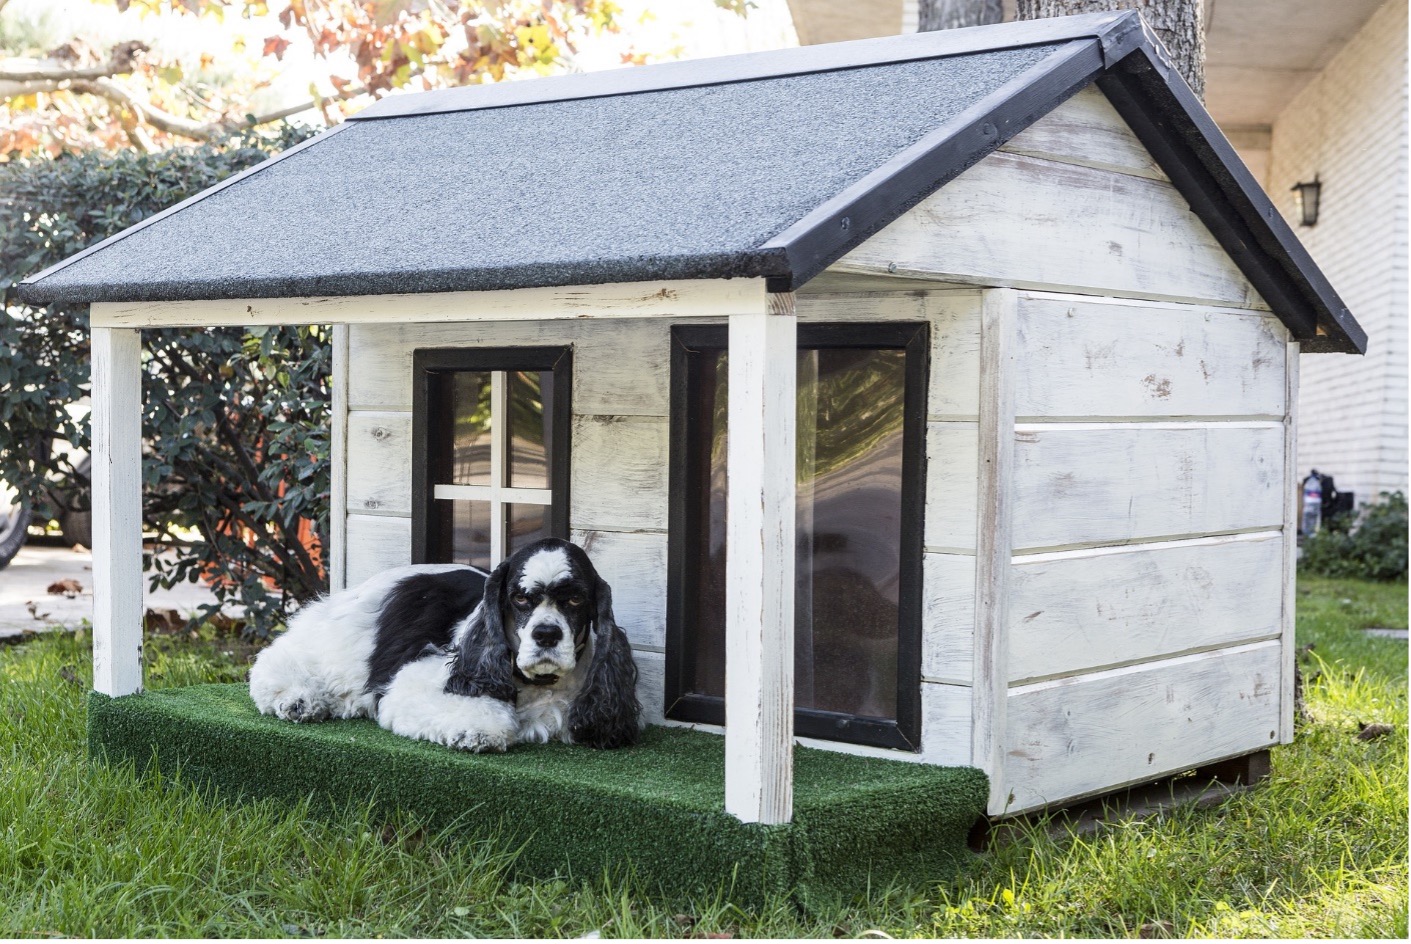 What is the best thing to put in an outside dog kennel?